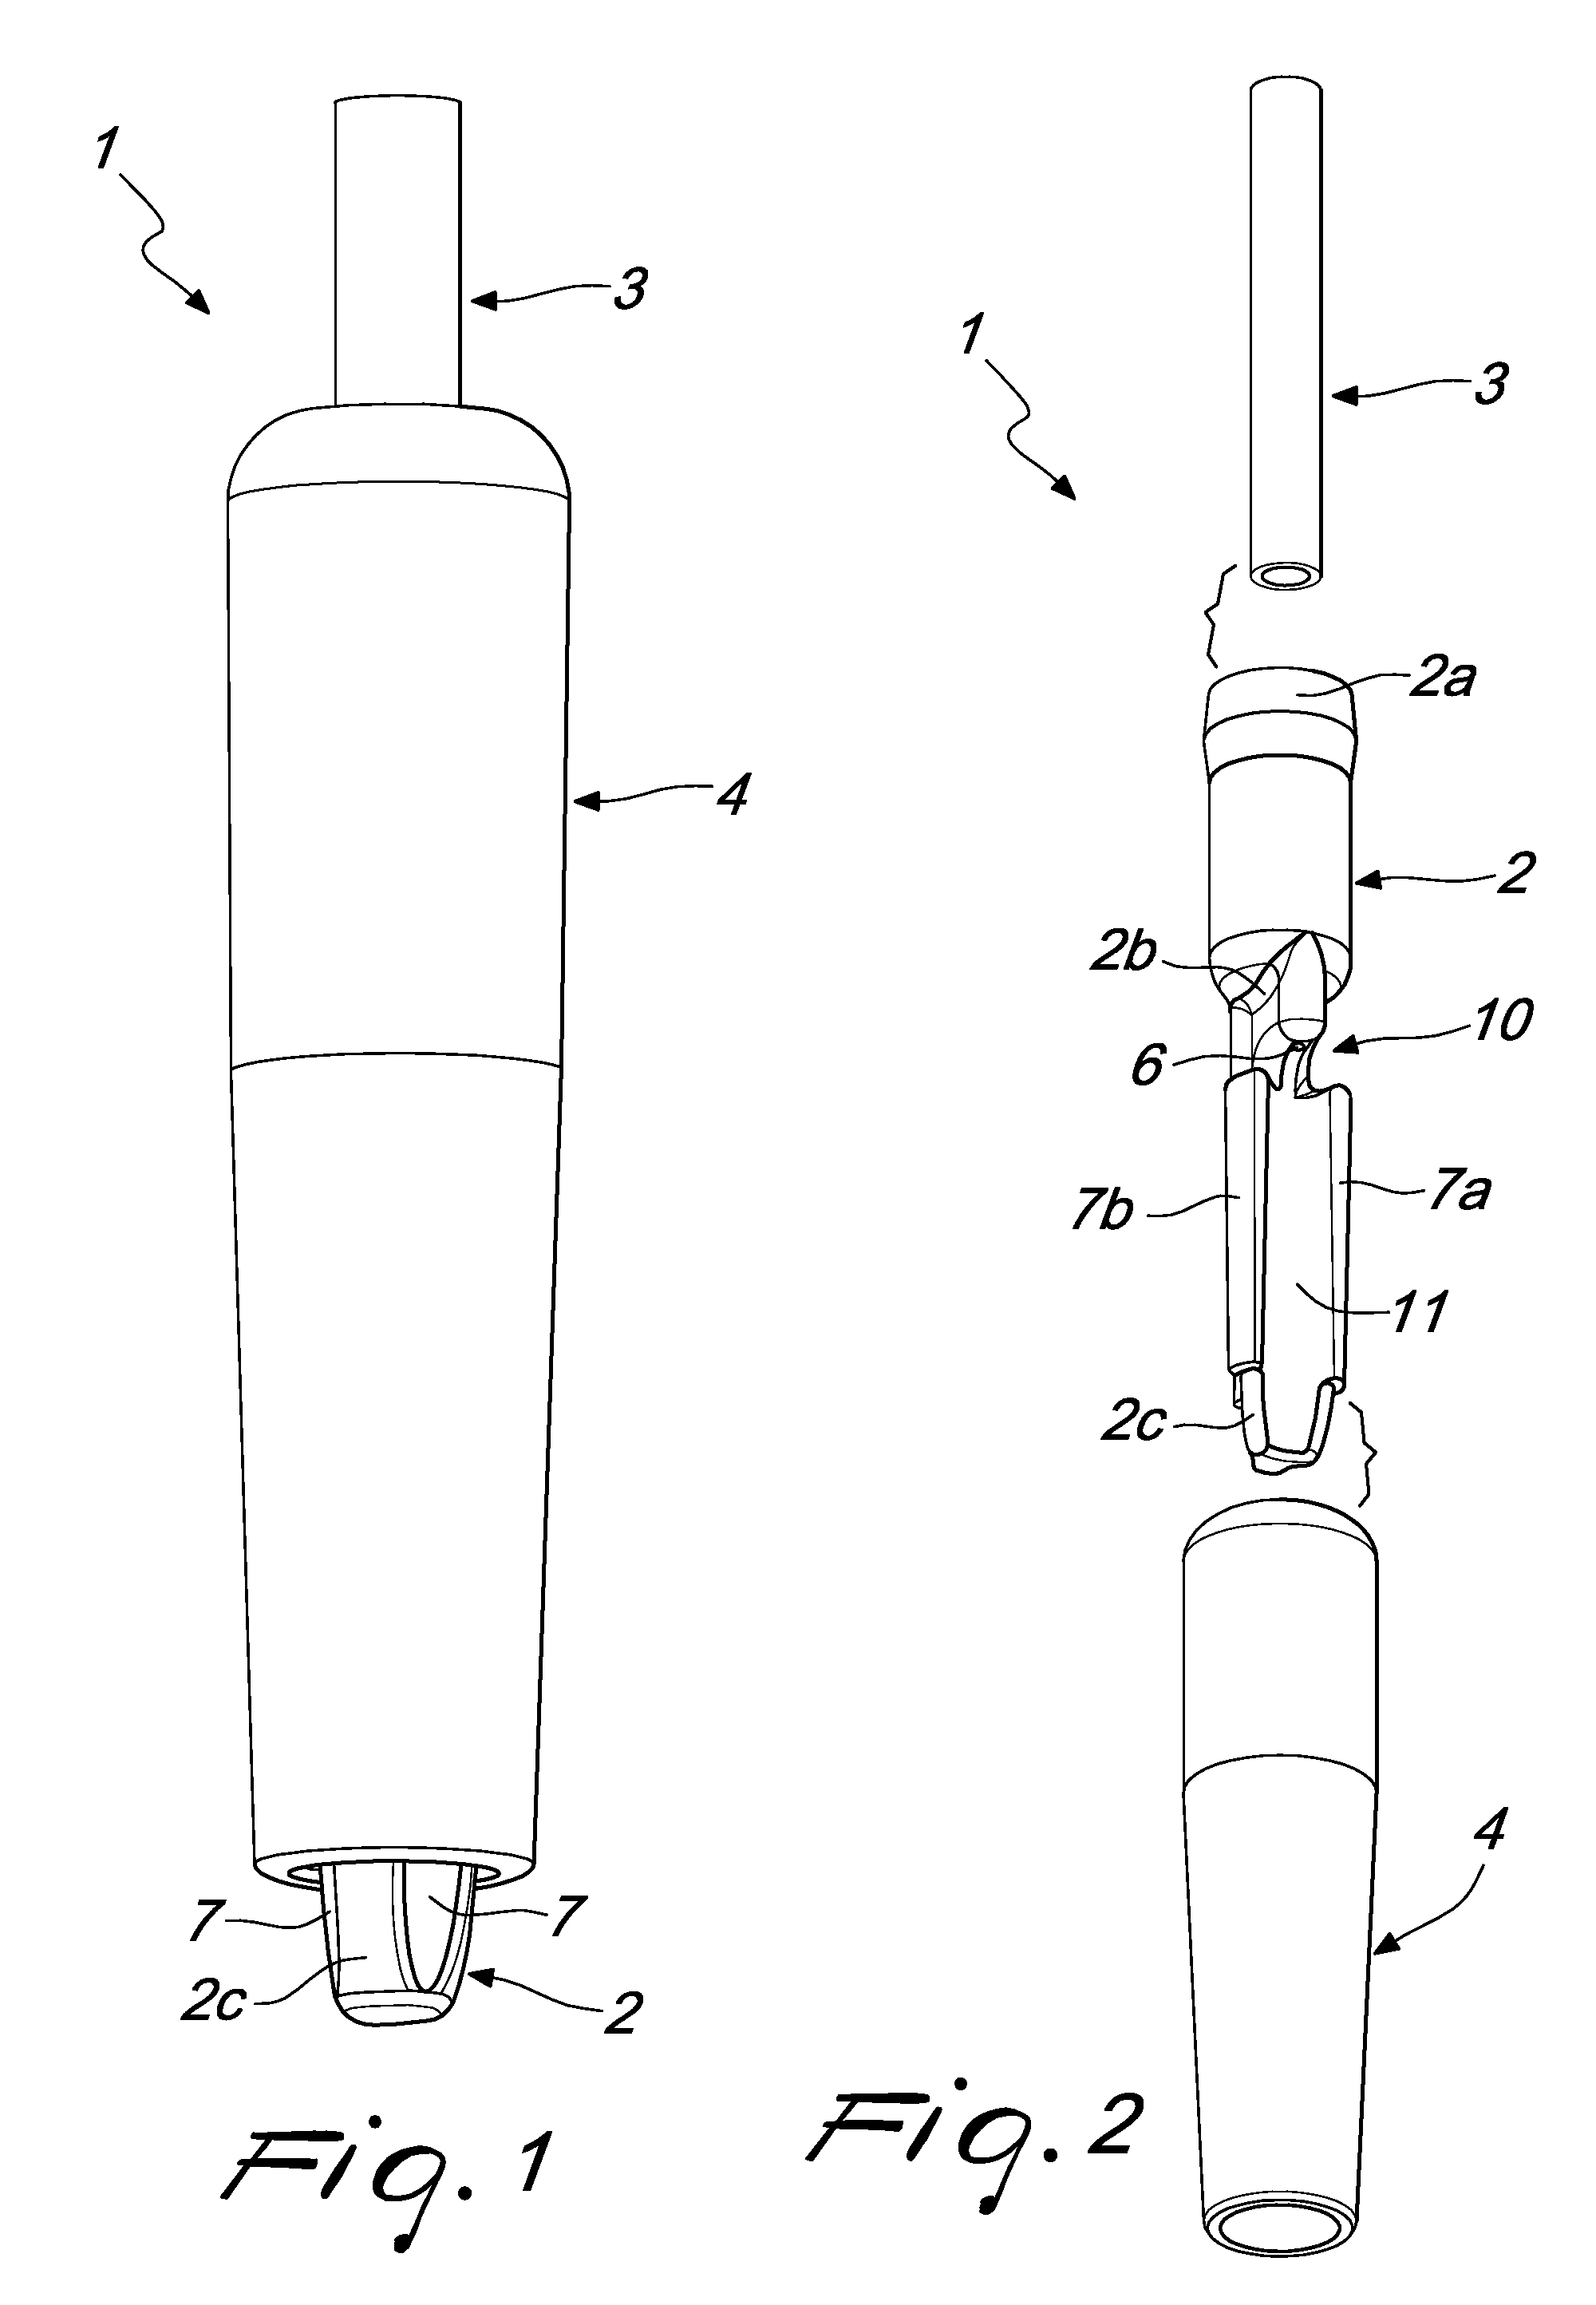 Mixing, heating and/or whipping device for preparing hot beverages